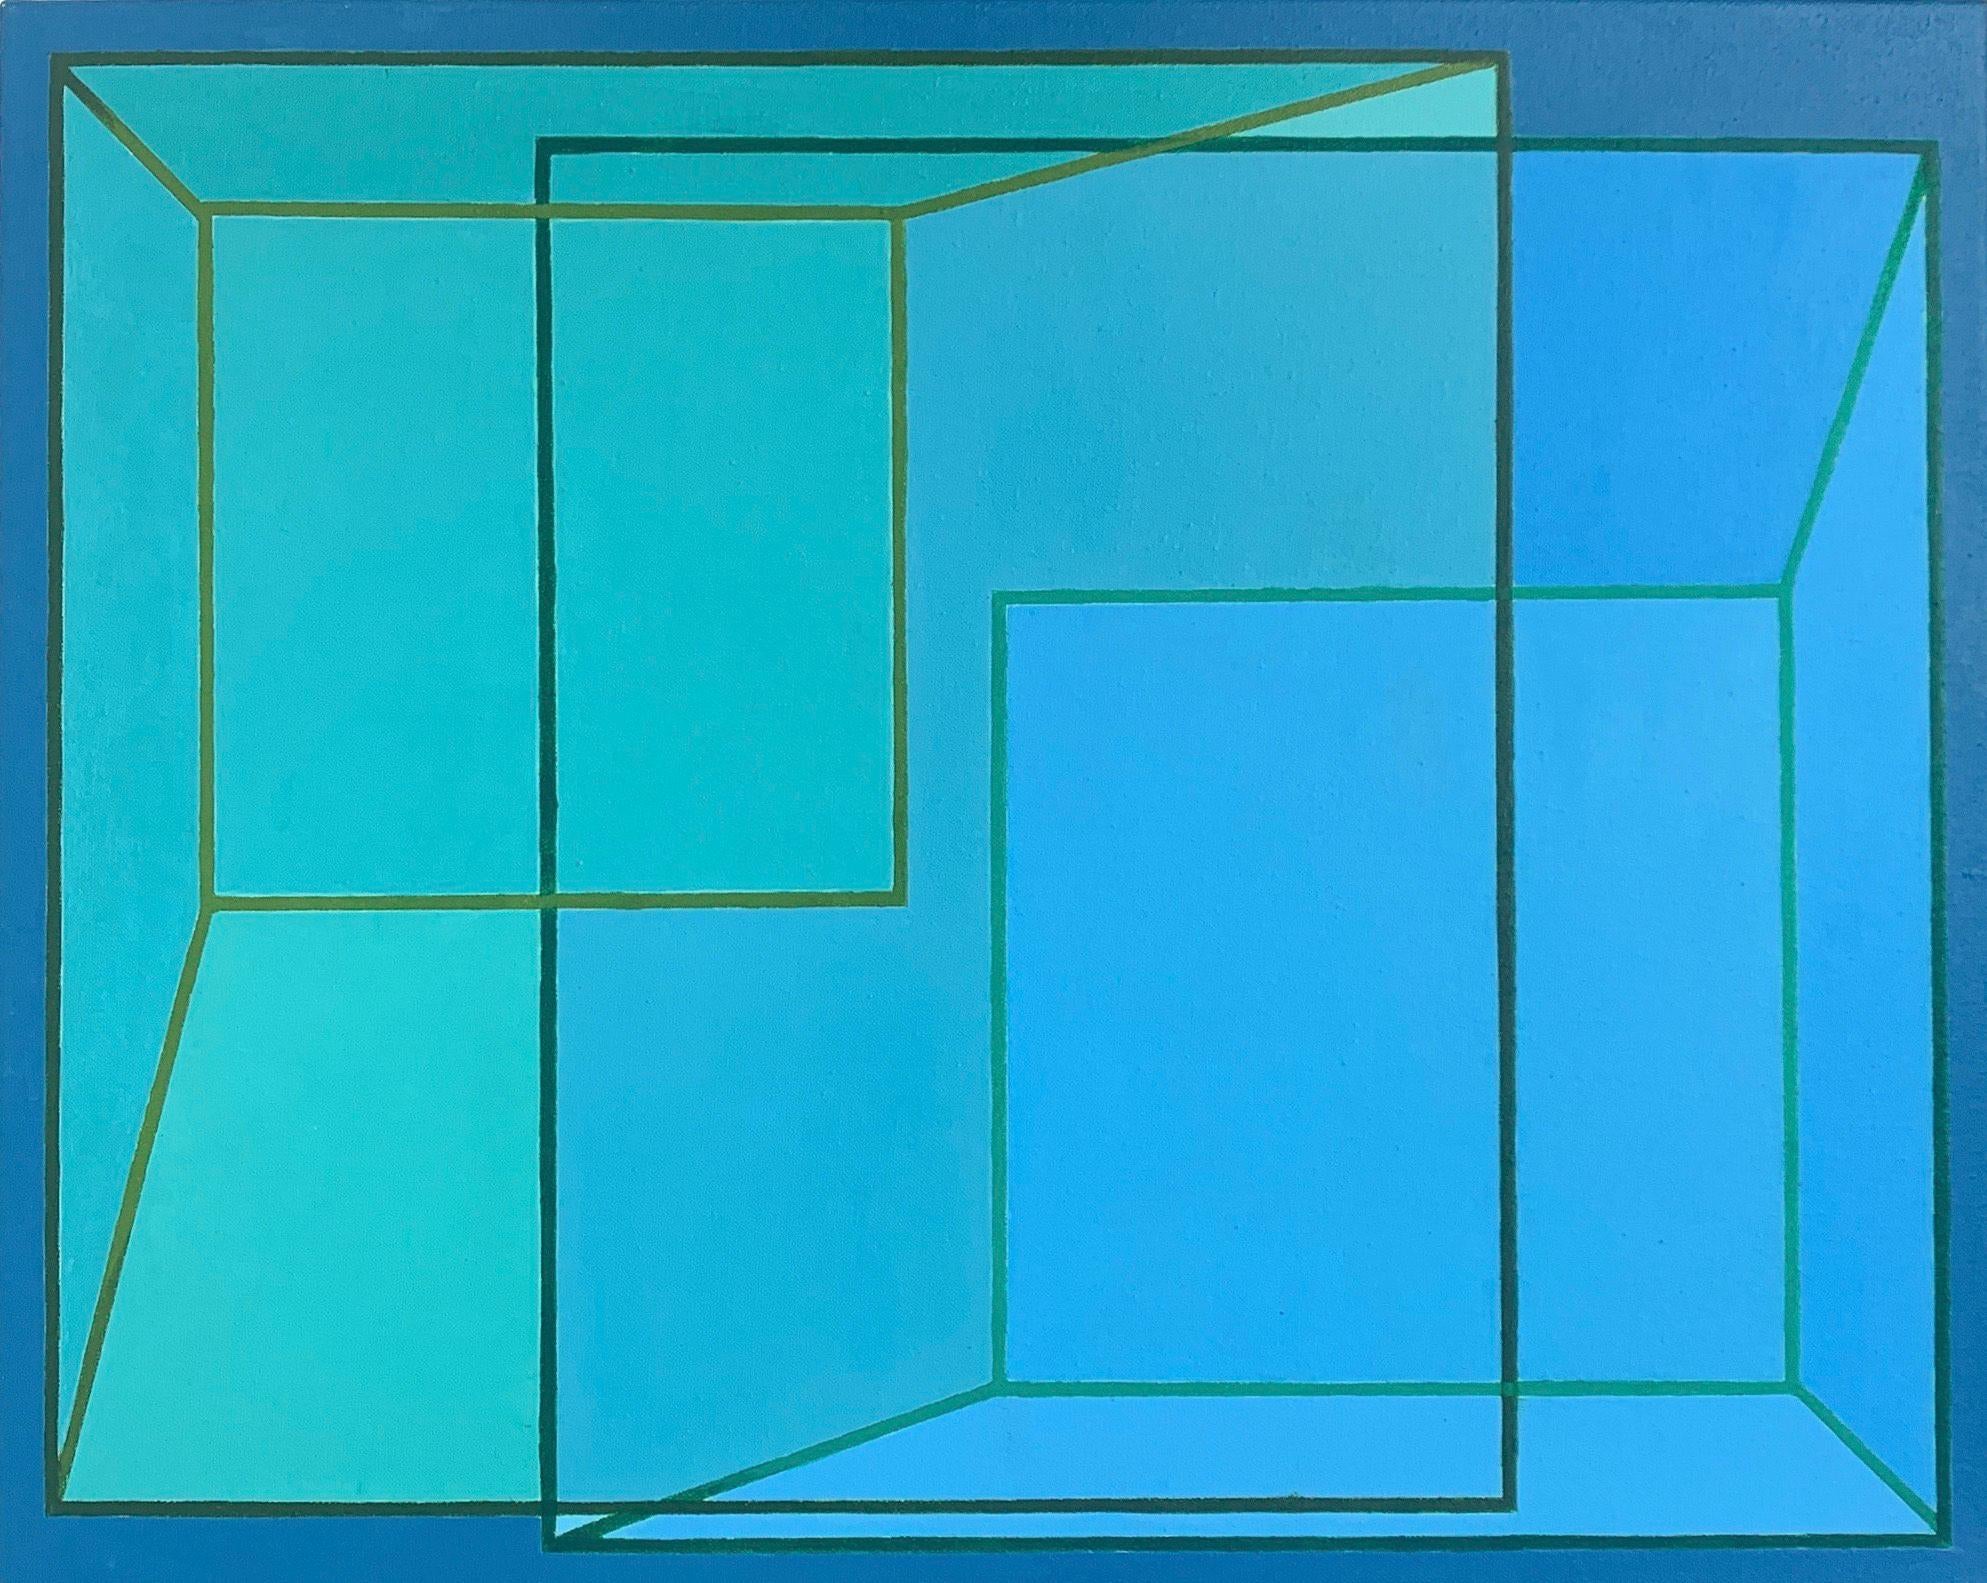 Benjamin Weaver Abstract Painting - Overlap #2: geometric abstract Op Art painting in blue, green, aqua & turquoise